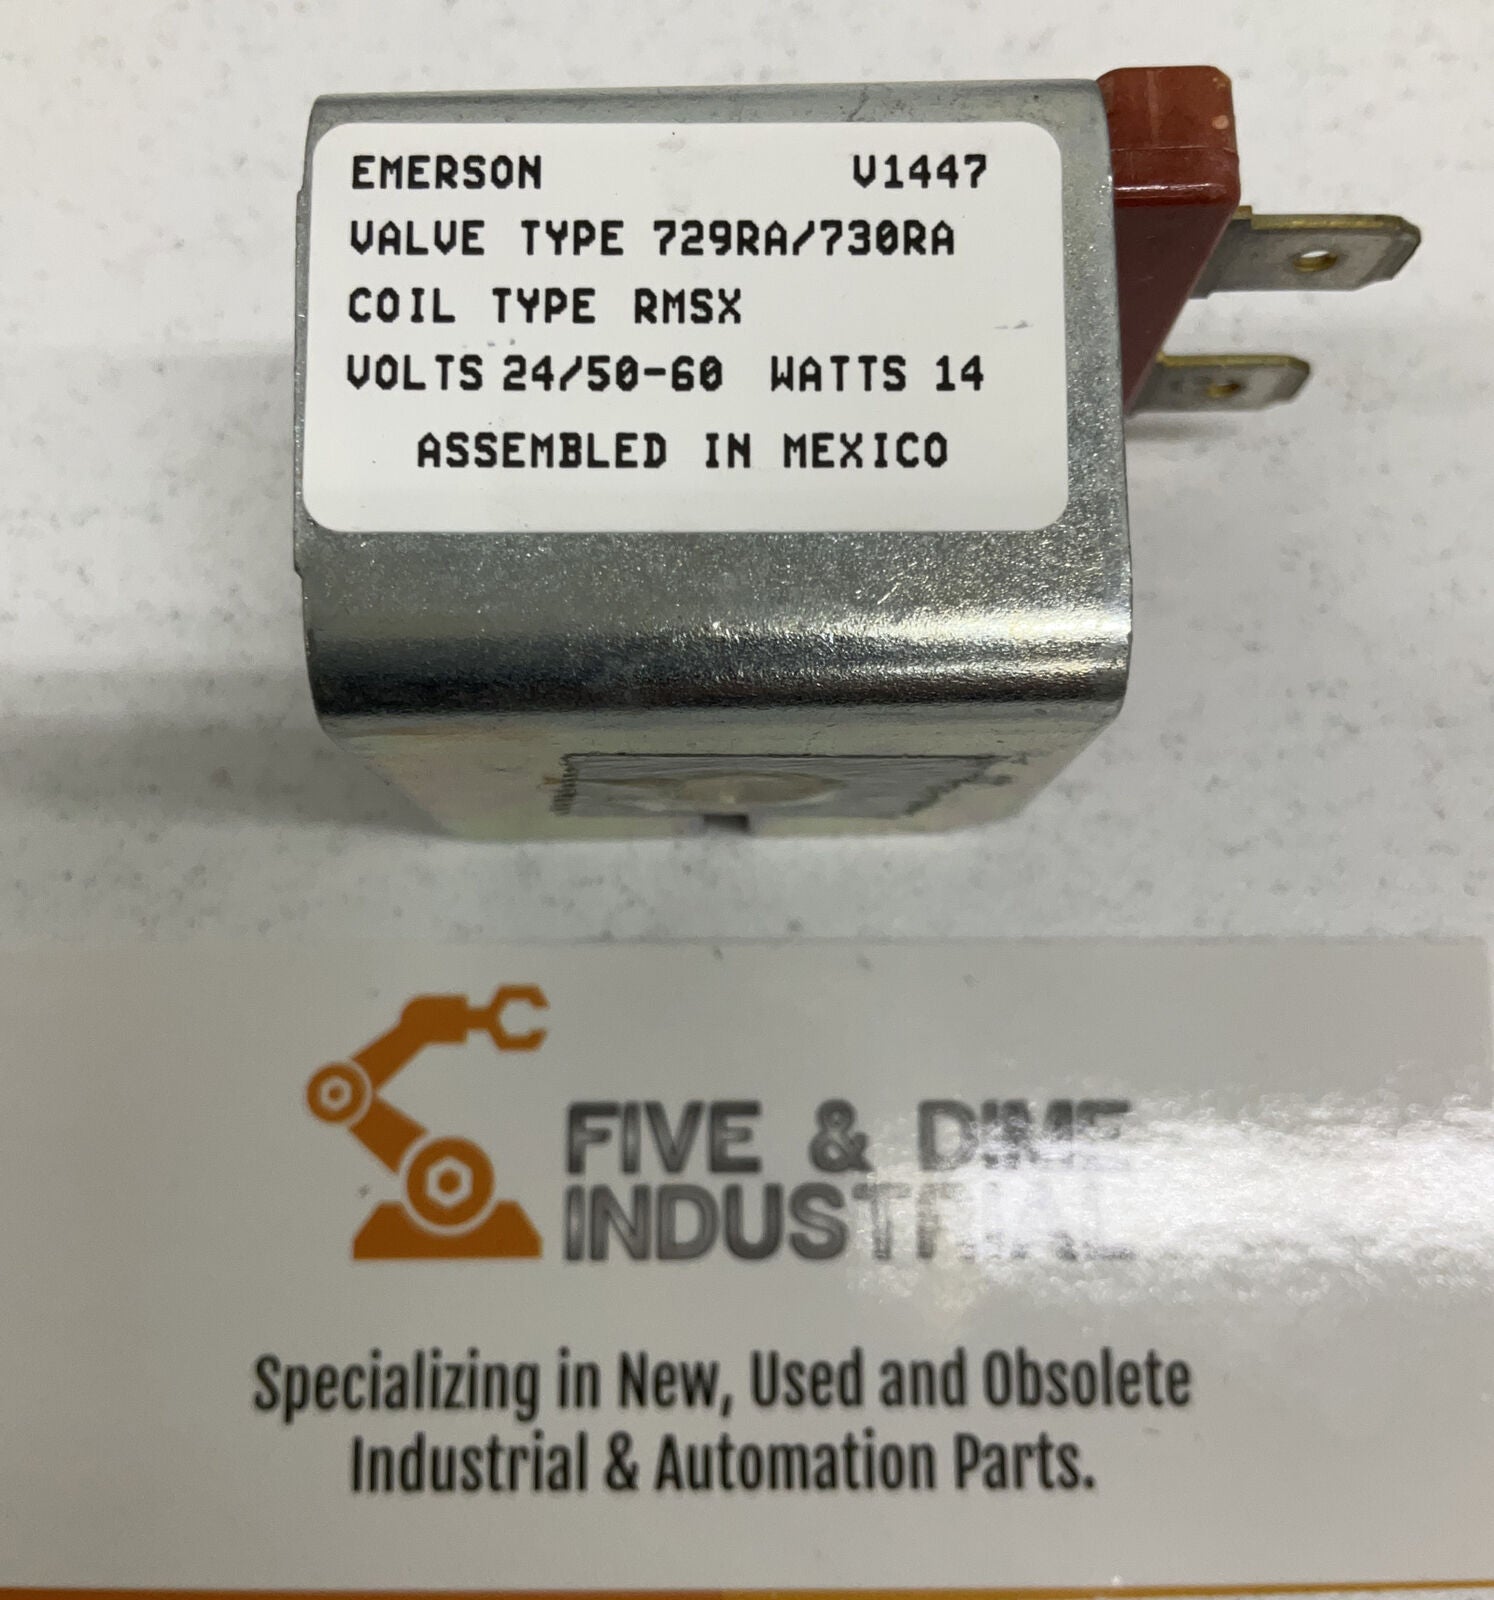 Copeland / Emerson 998-0060-03 New 24V Coil 1/4" Spade Connection (RE115)